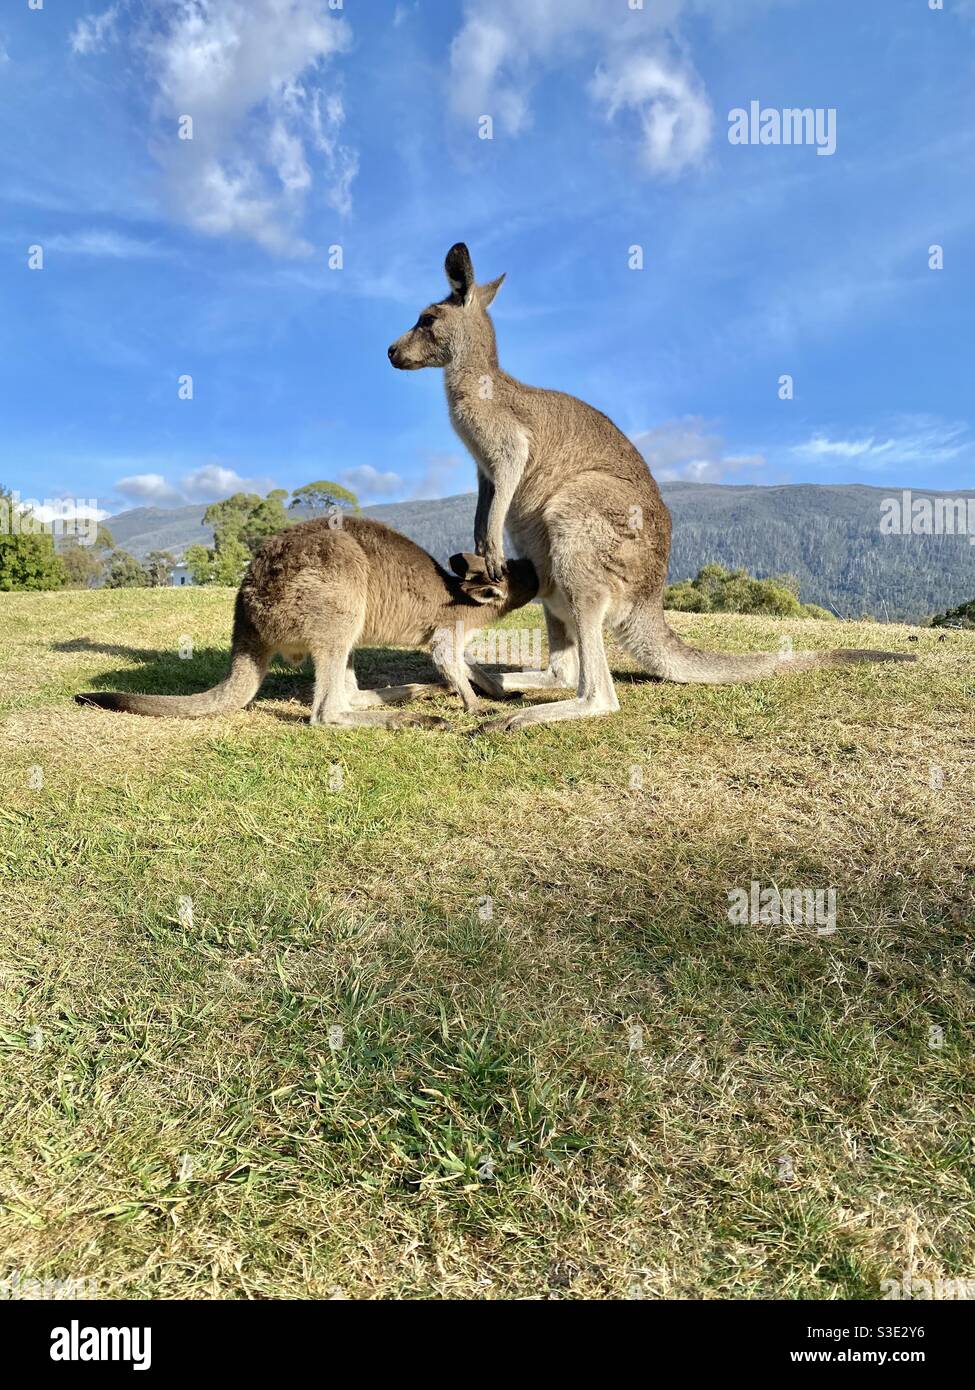 Young kangaroo joey feed from mother on hilltop. Iconic Australian female kangaroo stands as Joey suckles.  Concept Australia, travel, native animals, family and love. Stock Photo